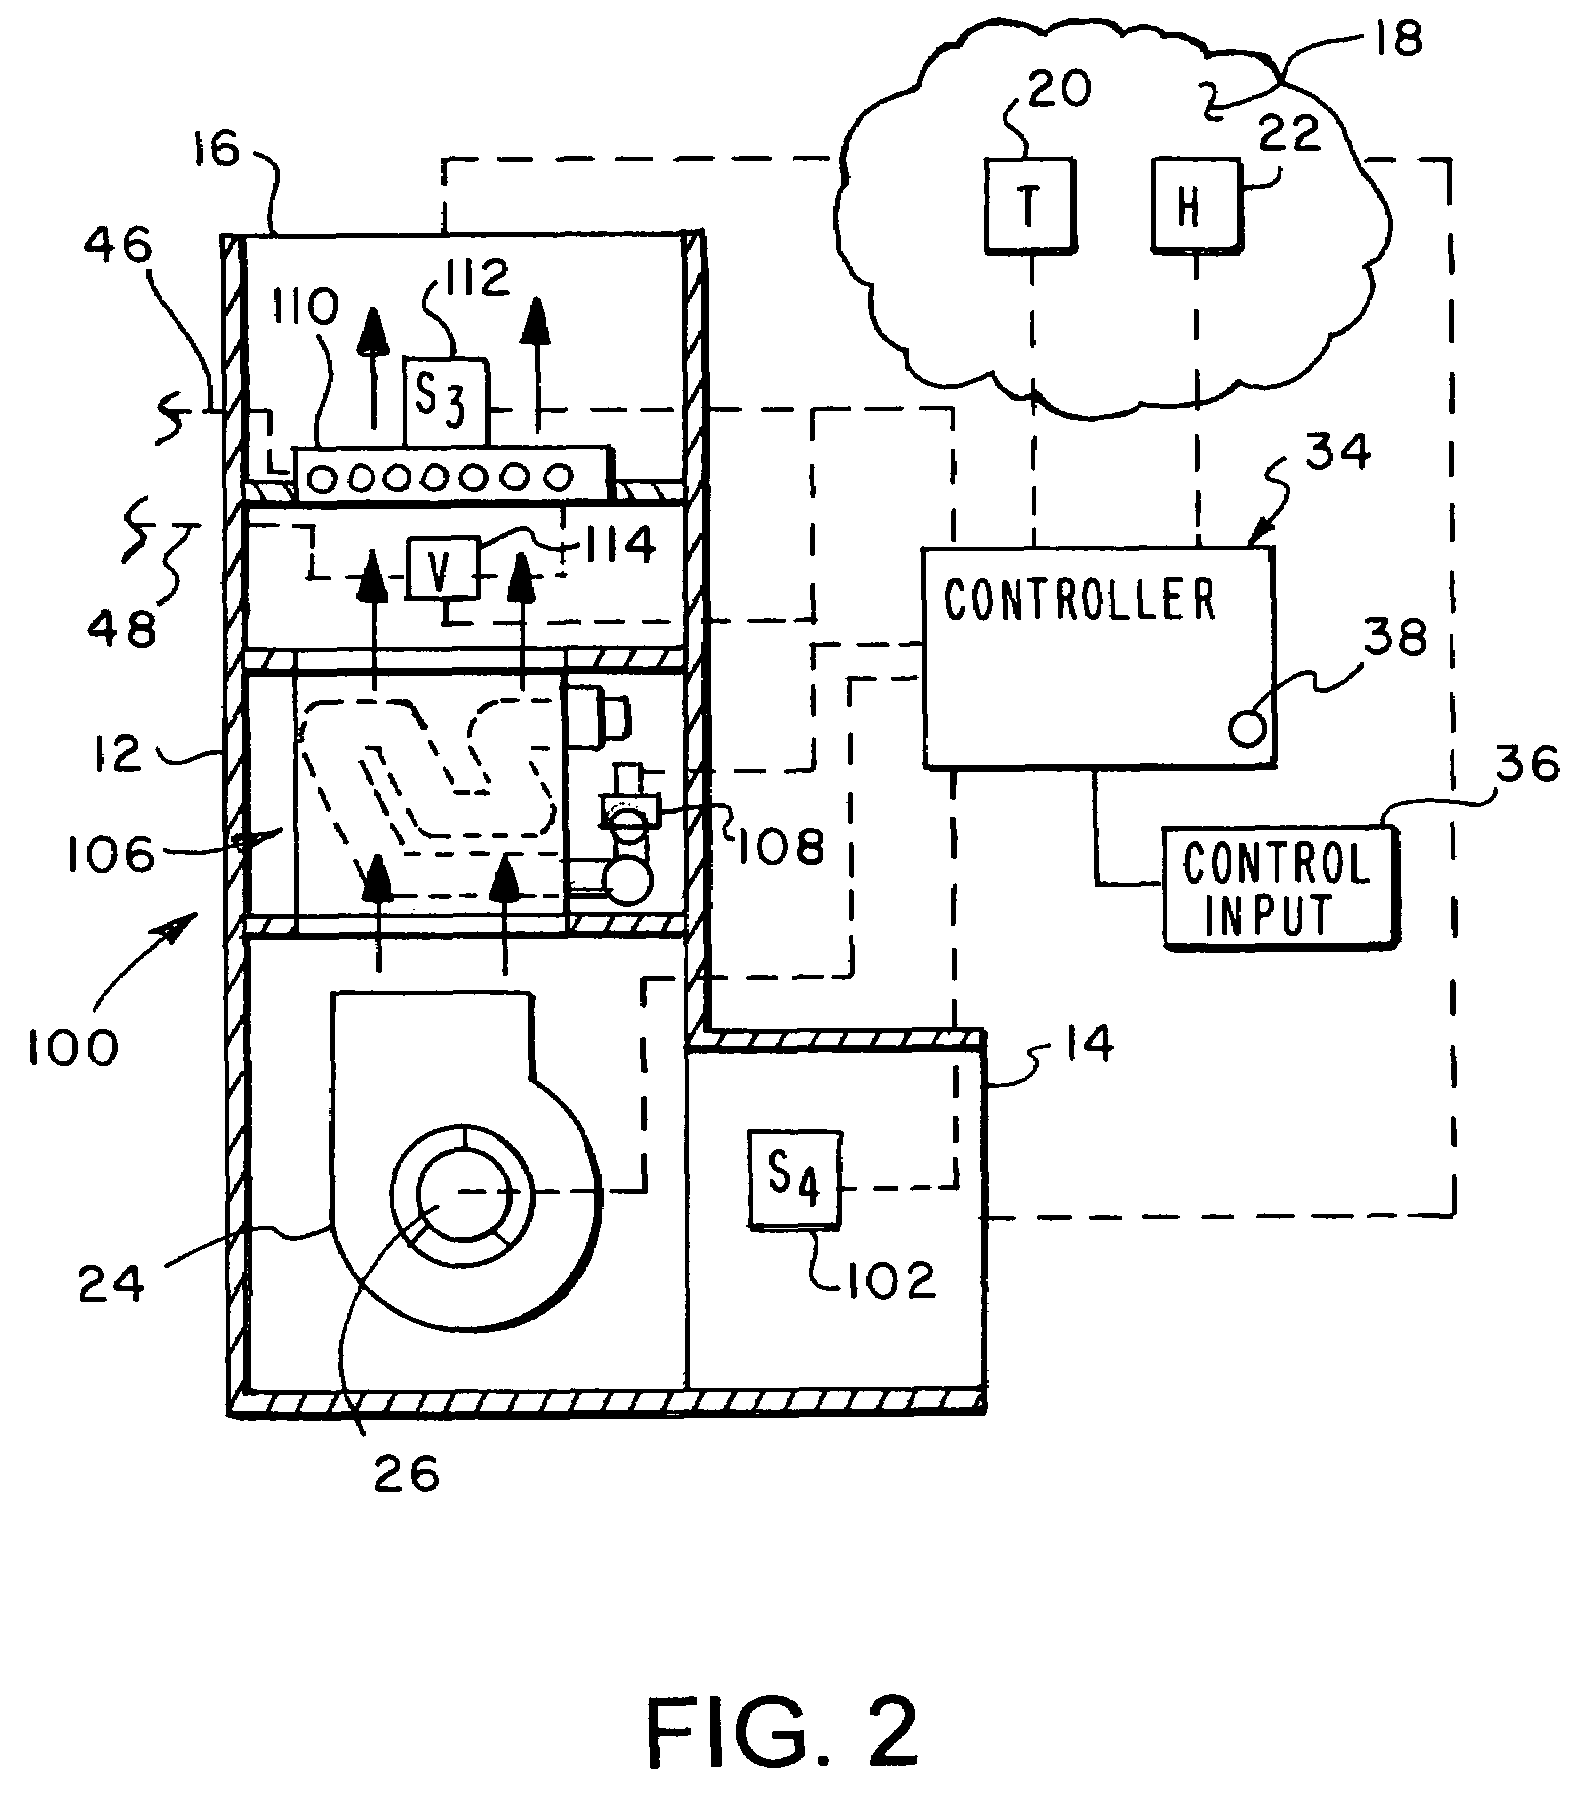 Controlling airflow in an air conditioning system for control of system discharge temperature and humidity